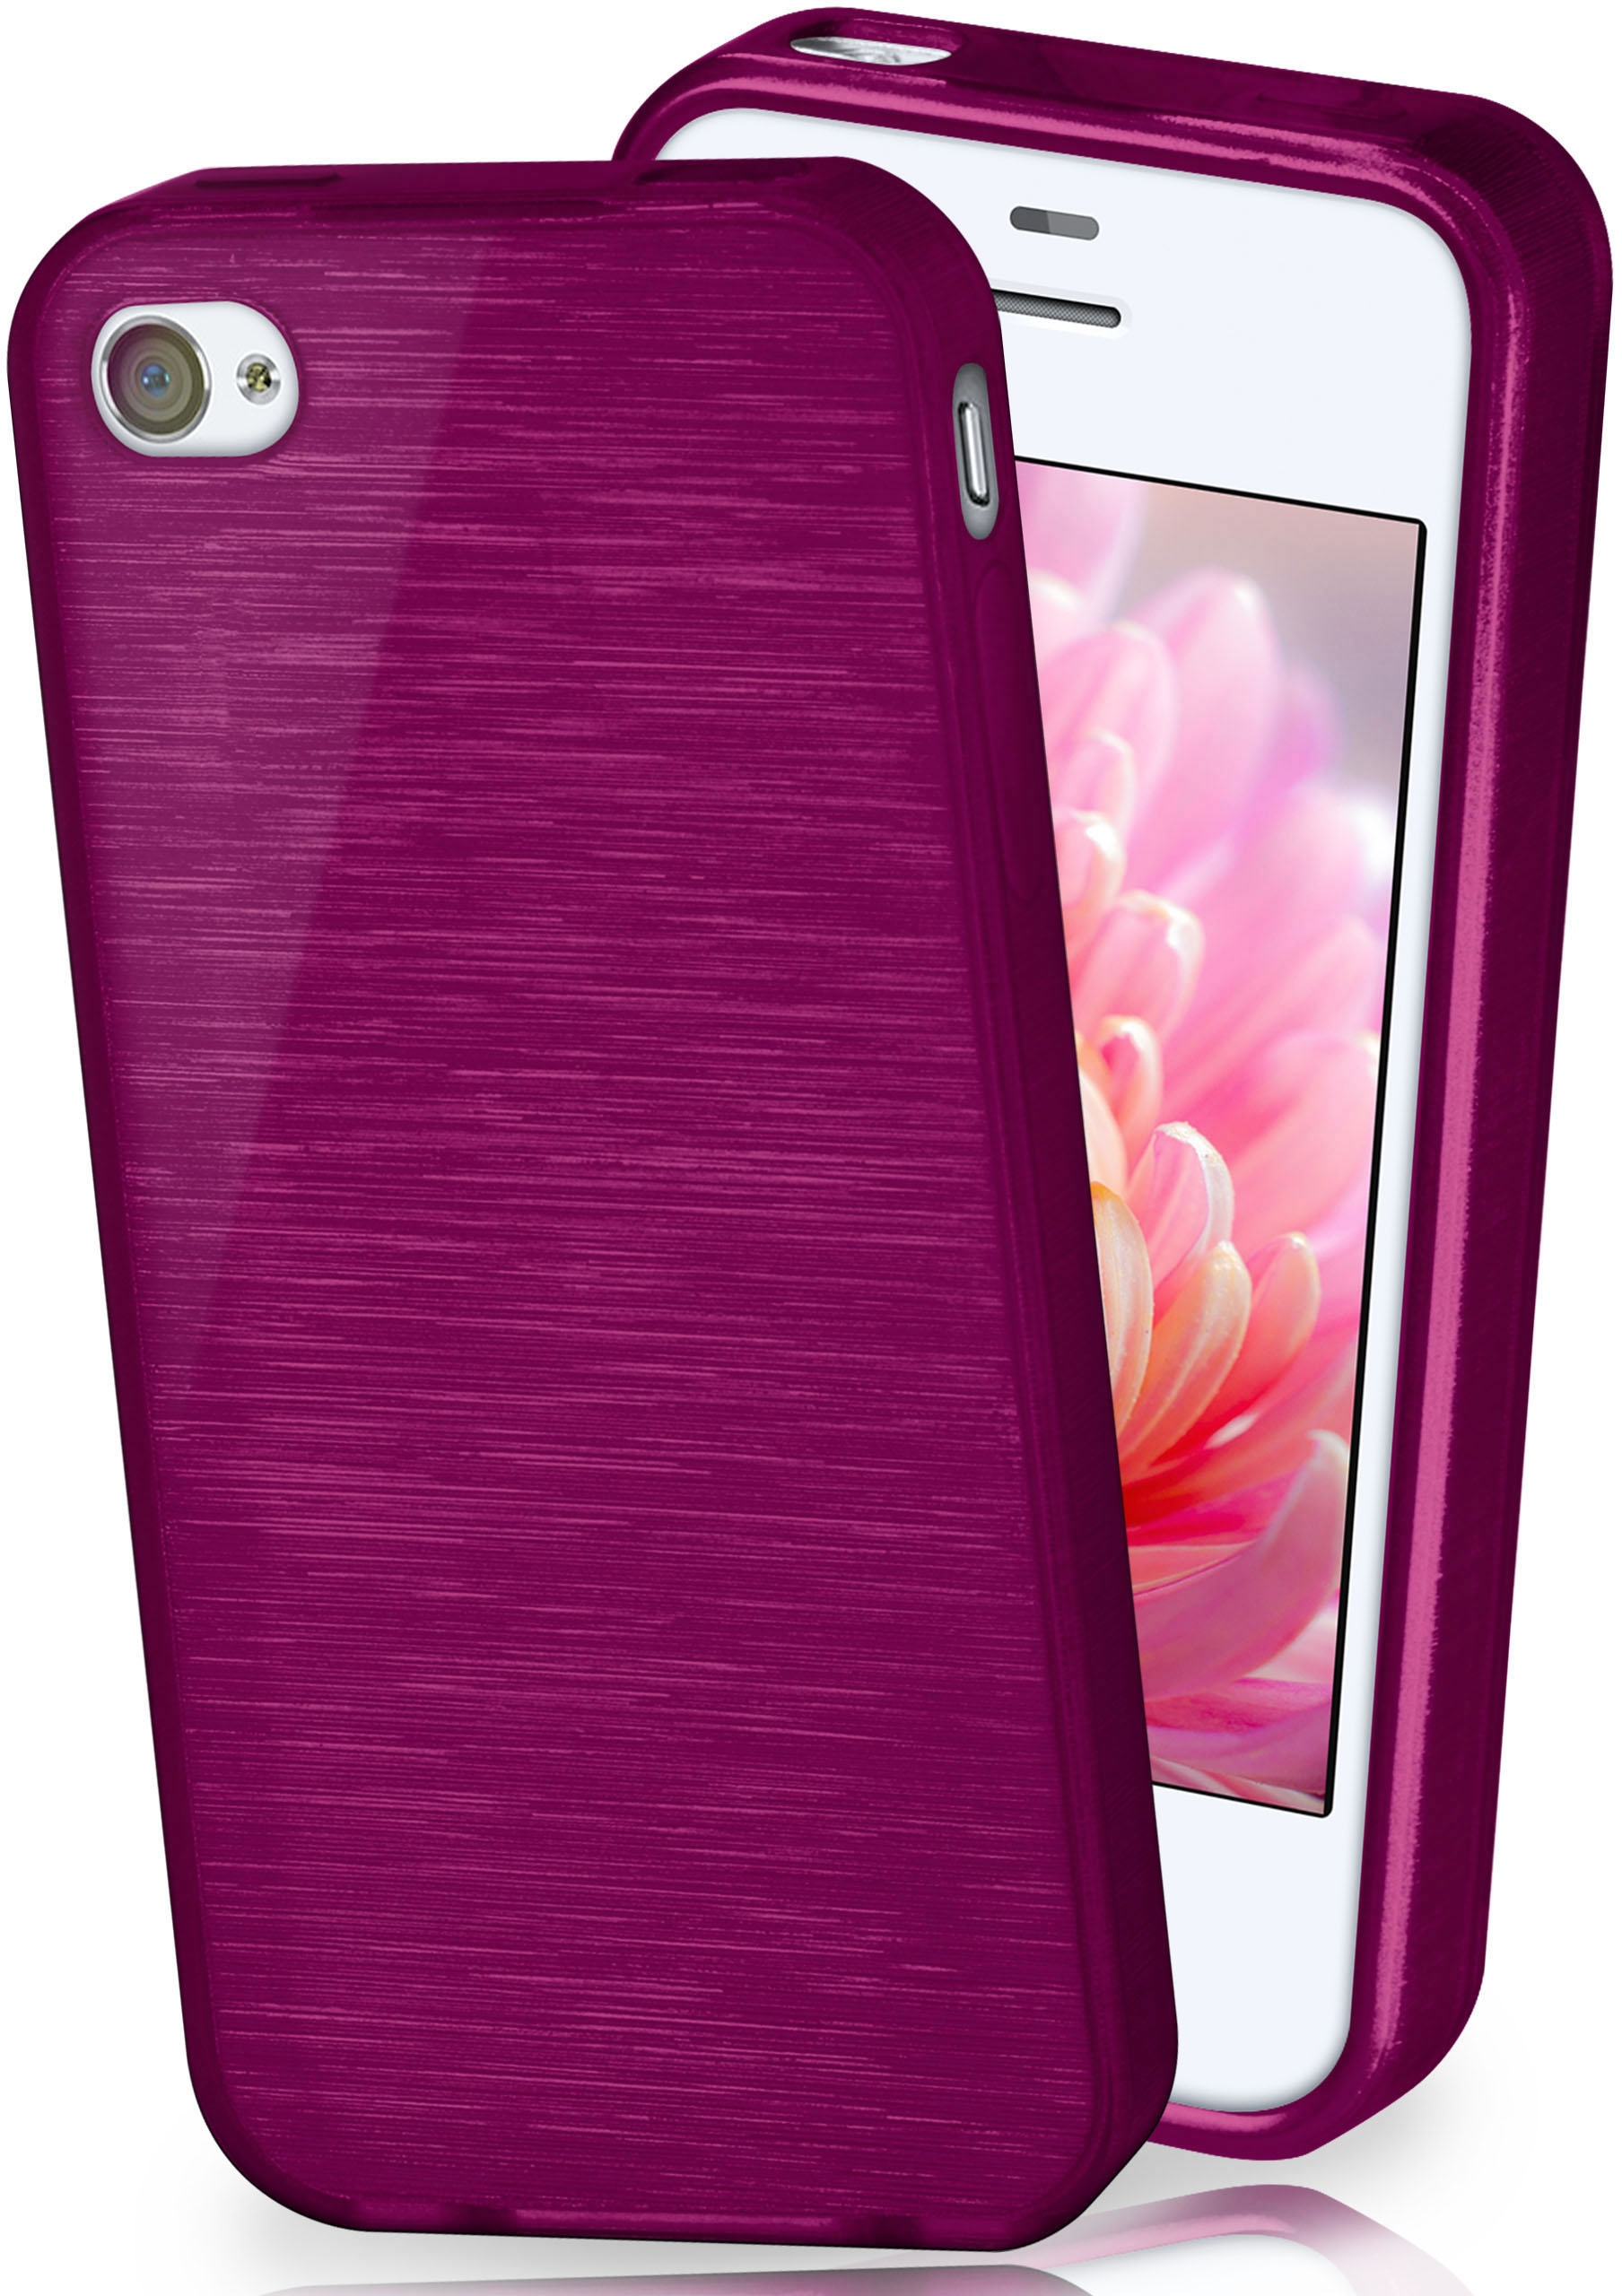 Case, iPhone MOEX 4, iPhone Purpure-Purple Brushed 4s Apple, Backcover, /